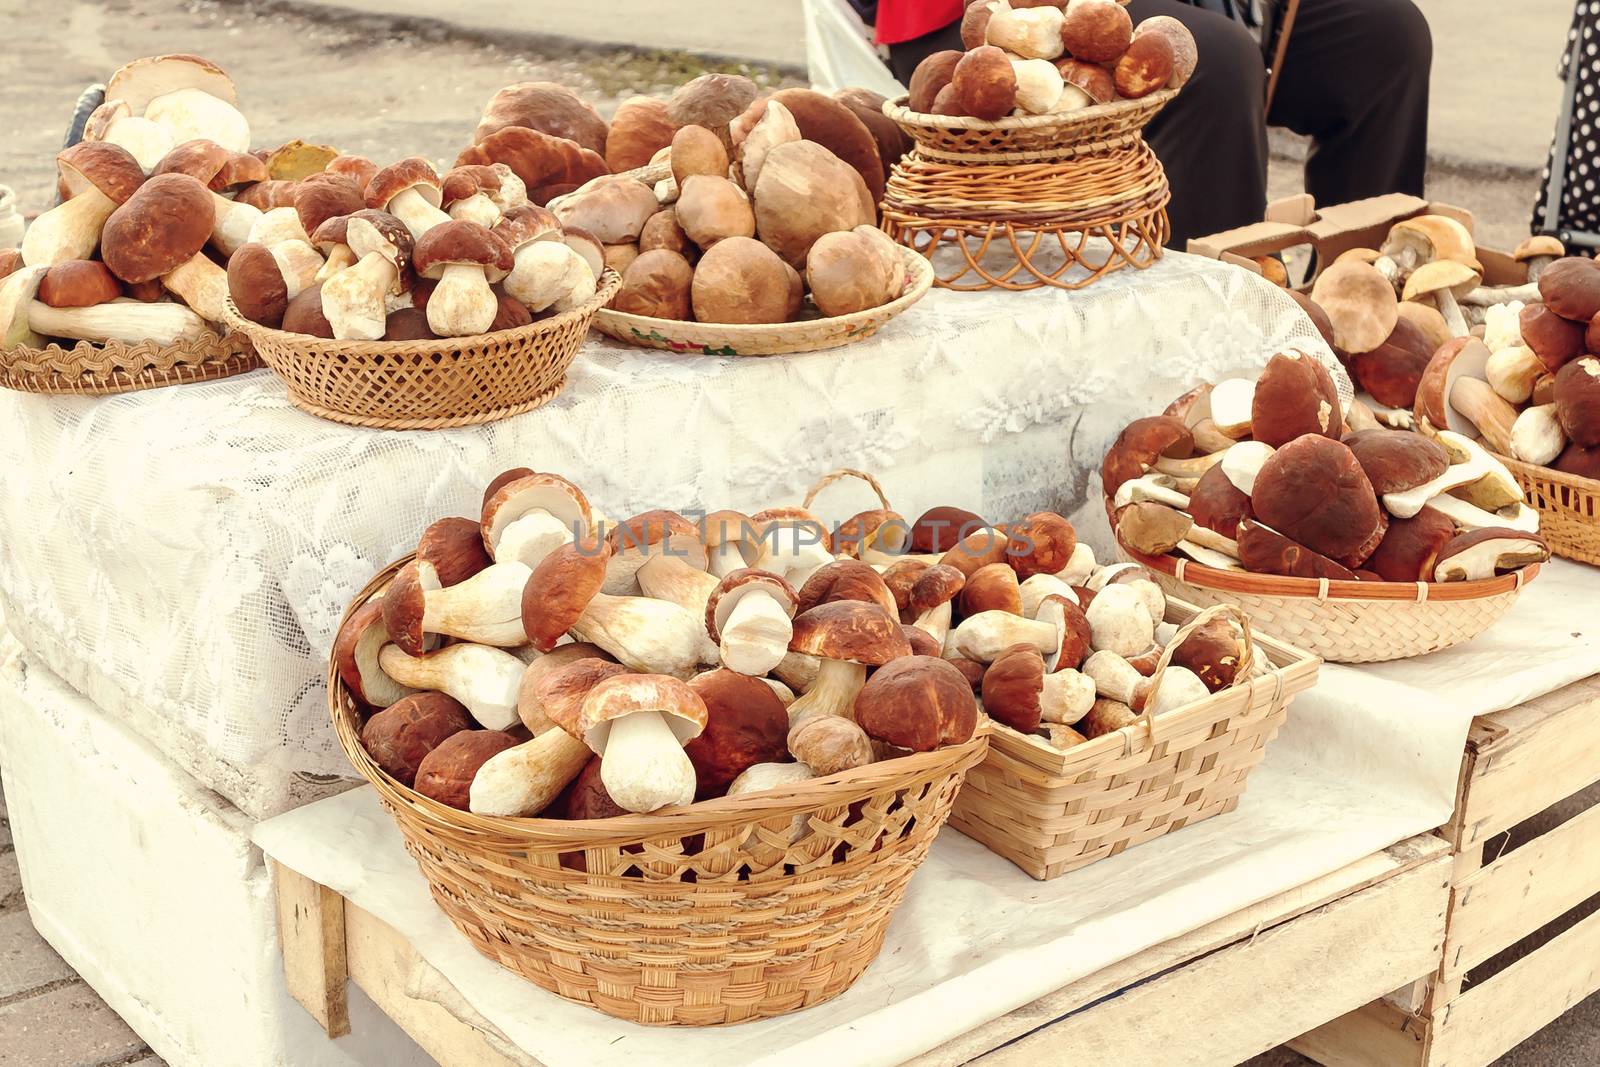 Many beautiful edible forest mushrooms boletus edulis f. pinophilus known as king bolete, penny bun and sep in wicker baskets laid out for sale on the market by galsand